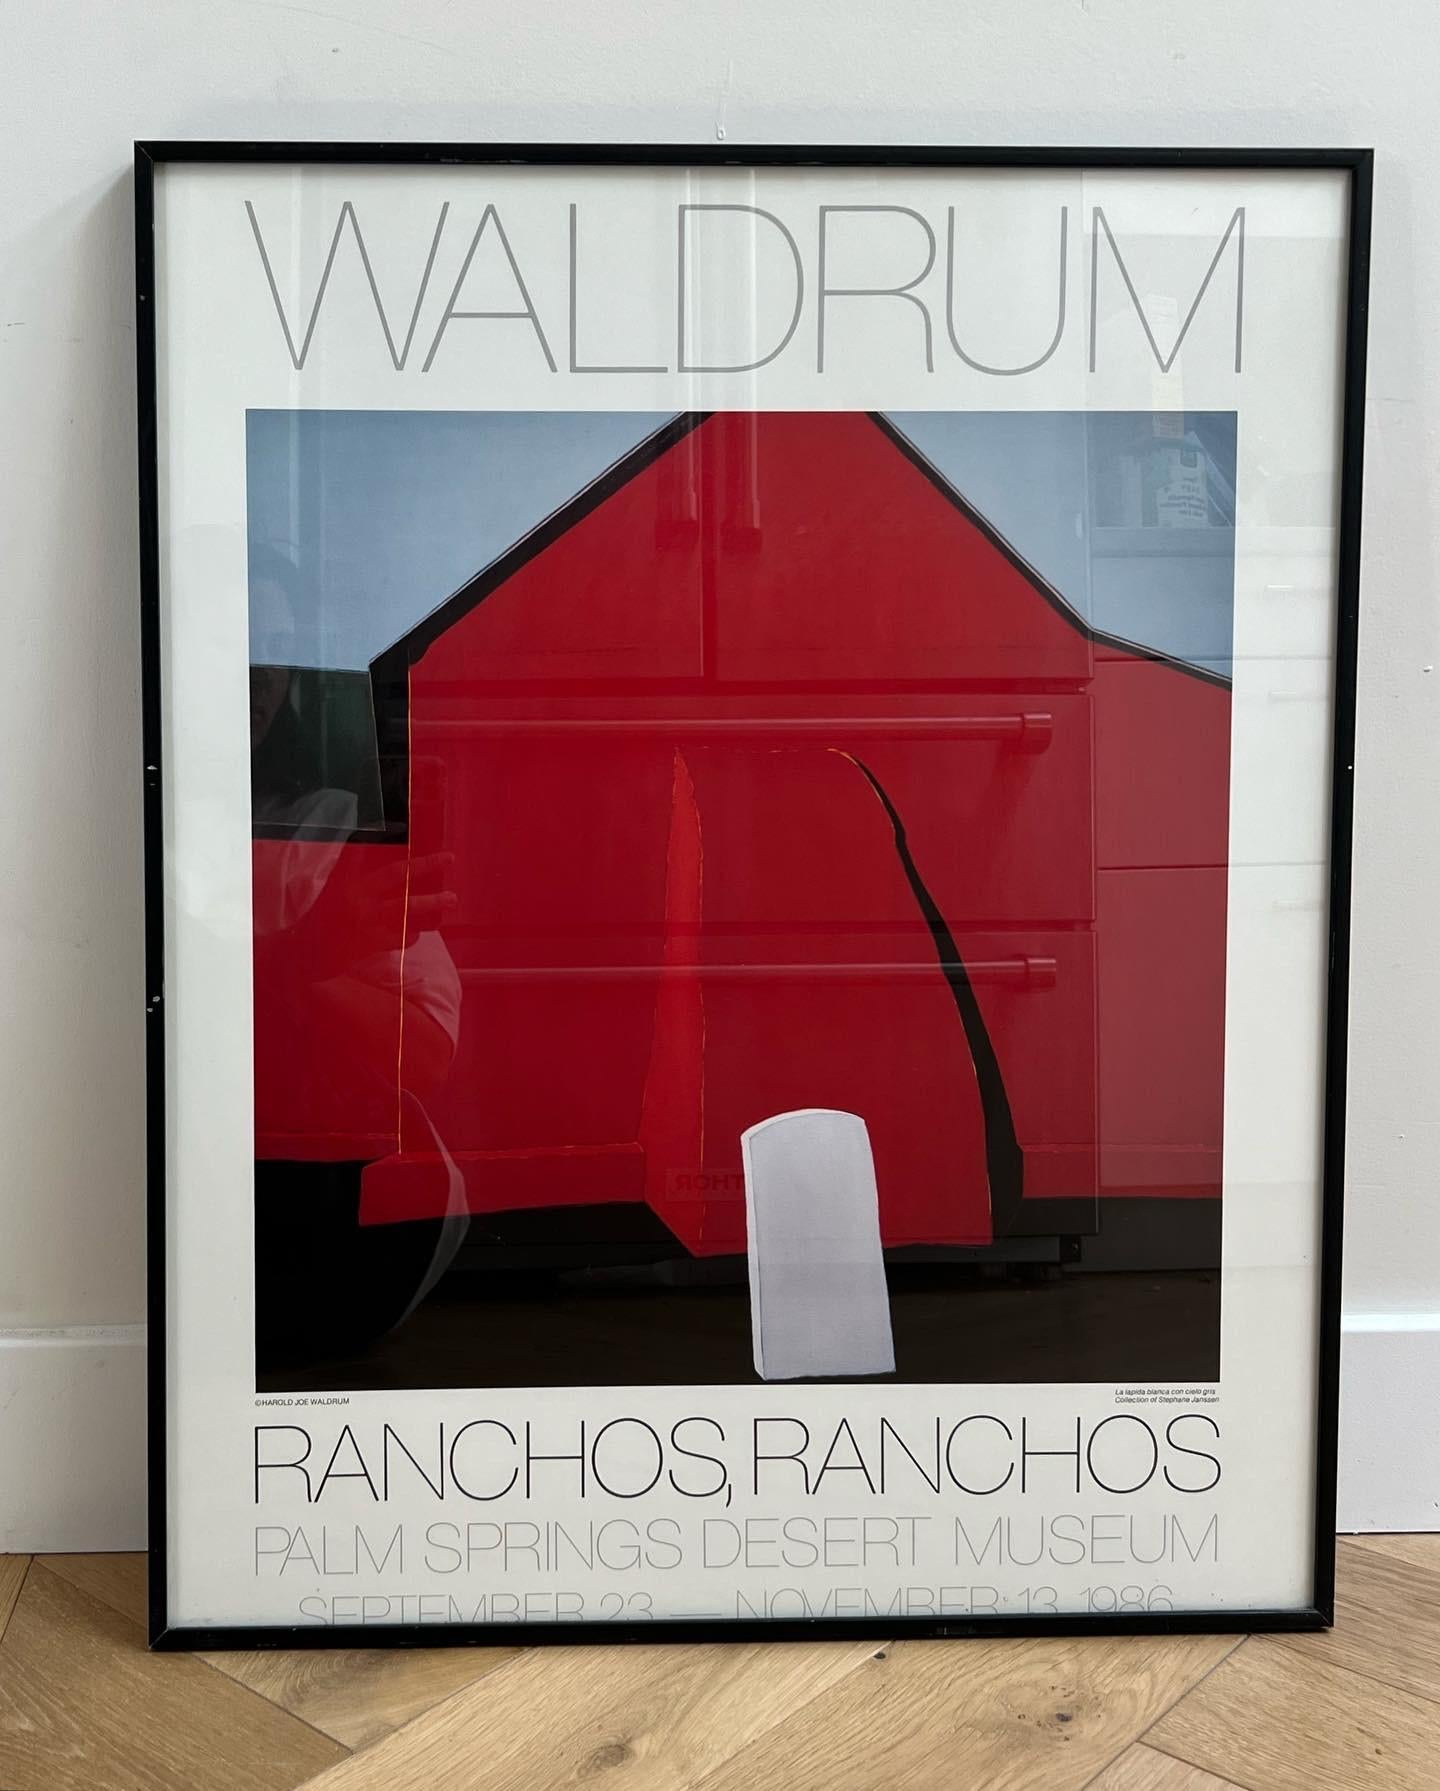 A vintage Harold Waldrum exhibition poster from the Palm Springs Desert Museum, 1986. Framed in ebonized titanium and behind glass. Featuring his work « La lapida blanca con cielo gris » (the white tombstone with gray sky). Interestingly, the title